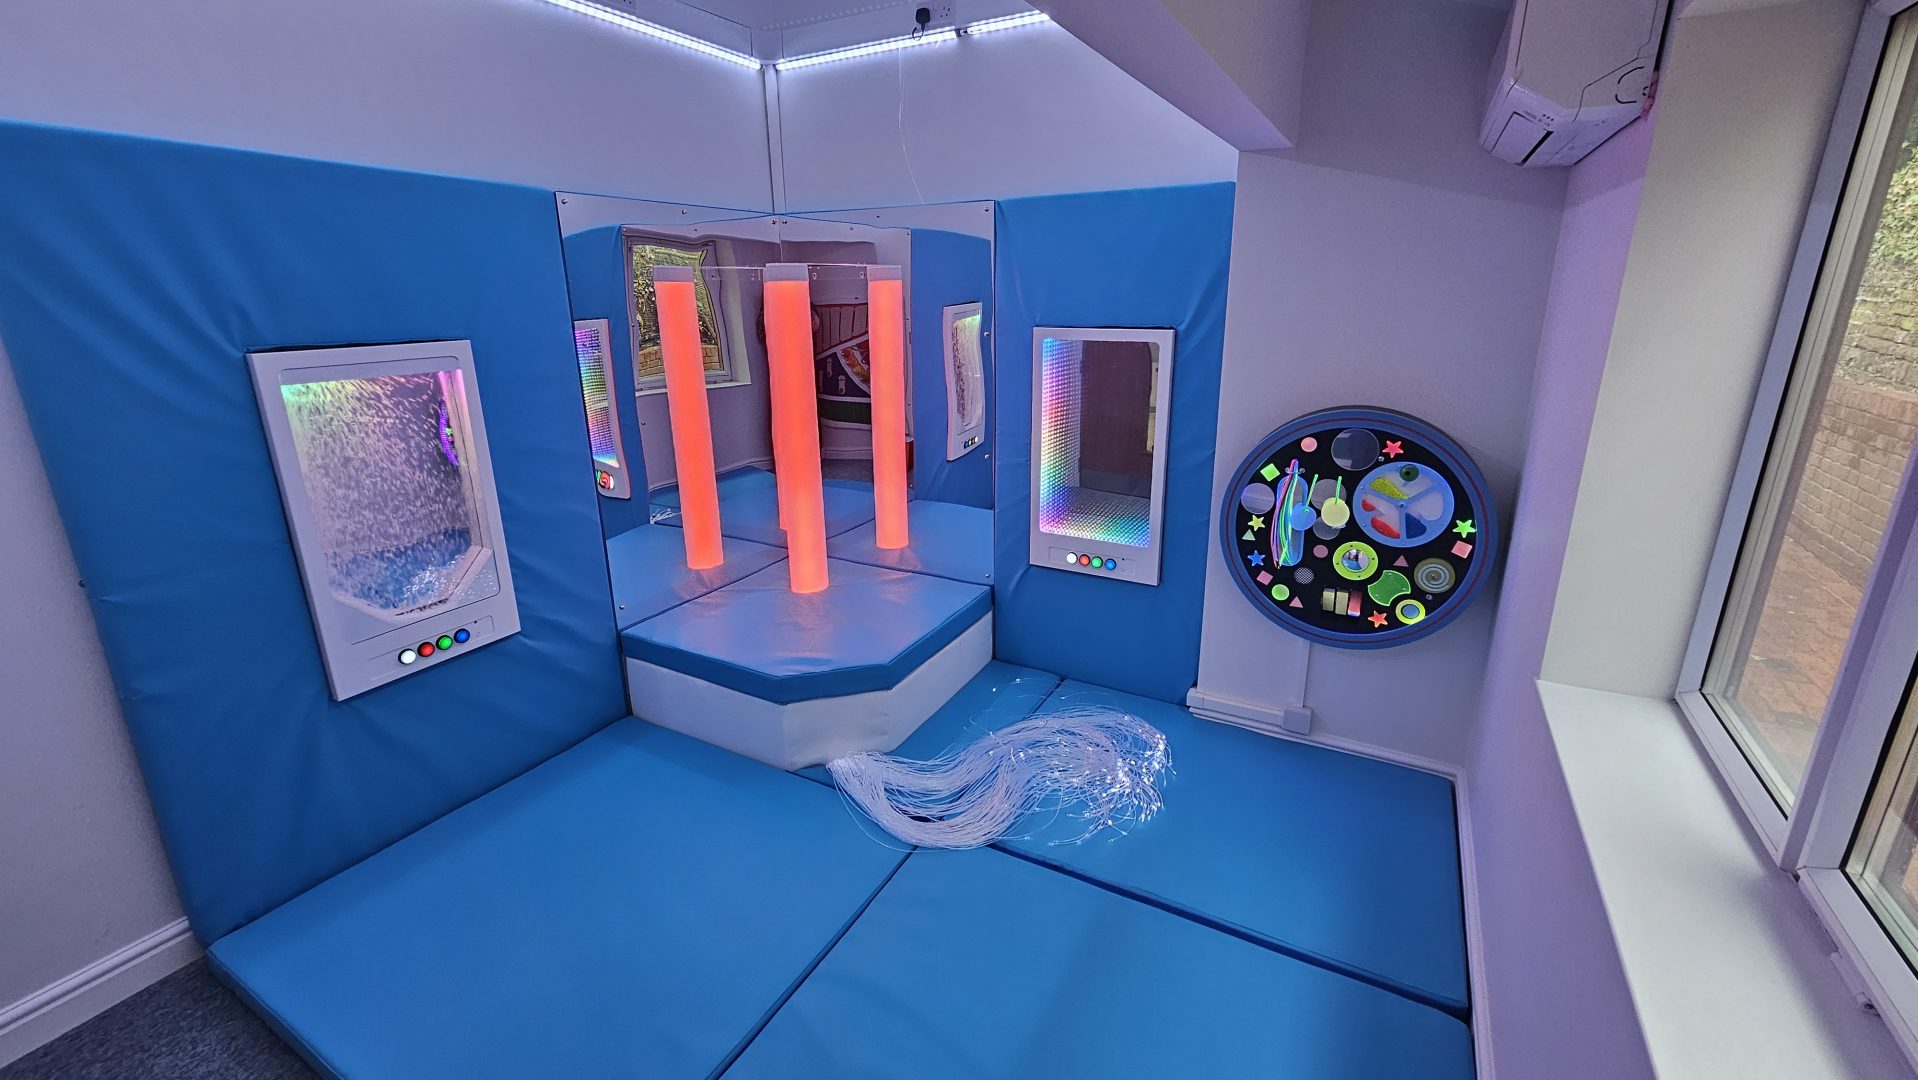 A well-equipped sensory room featuring calming chroma tubes, fibre optic lights, and interactive panels. The room has blue padded walls and flooring for safety, with a variety of sensory tools designed to help users with sensory processing disorders. Large windows allow natural light to complement the soothing environment. The Snow-Scape interactive panel allows users to immerse themselves in the beauty and joy of snowfall all year round. The Infinity-Glow Interactive panel provides an enchanting beauty of infinite reflections.